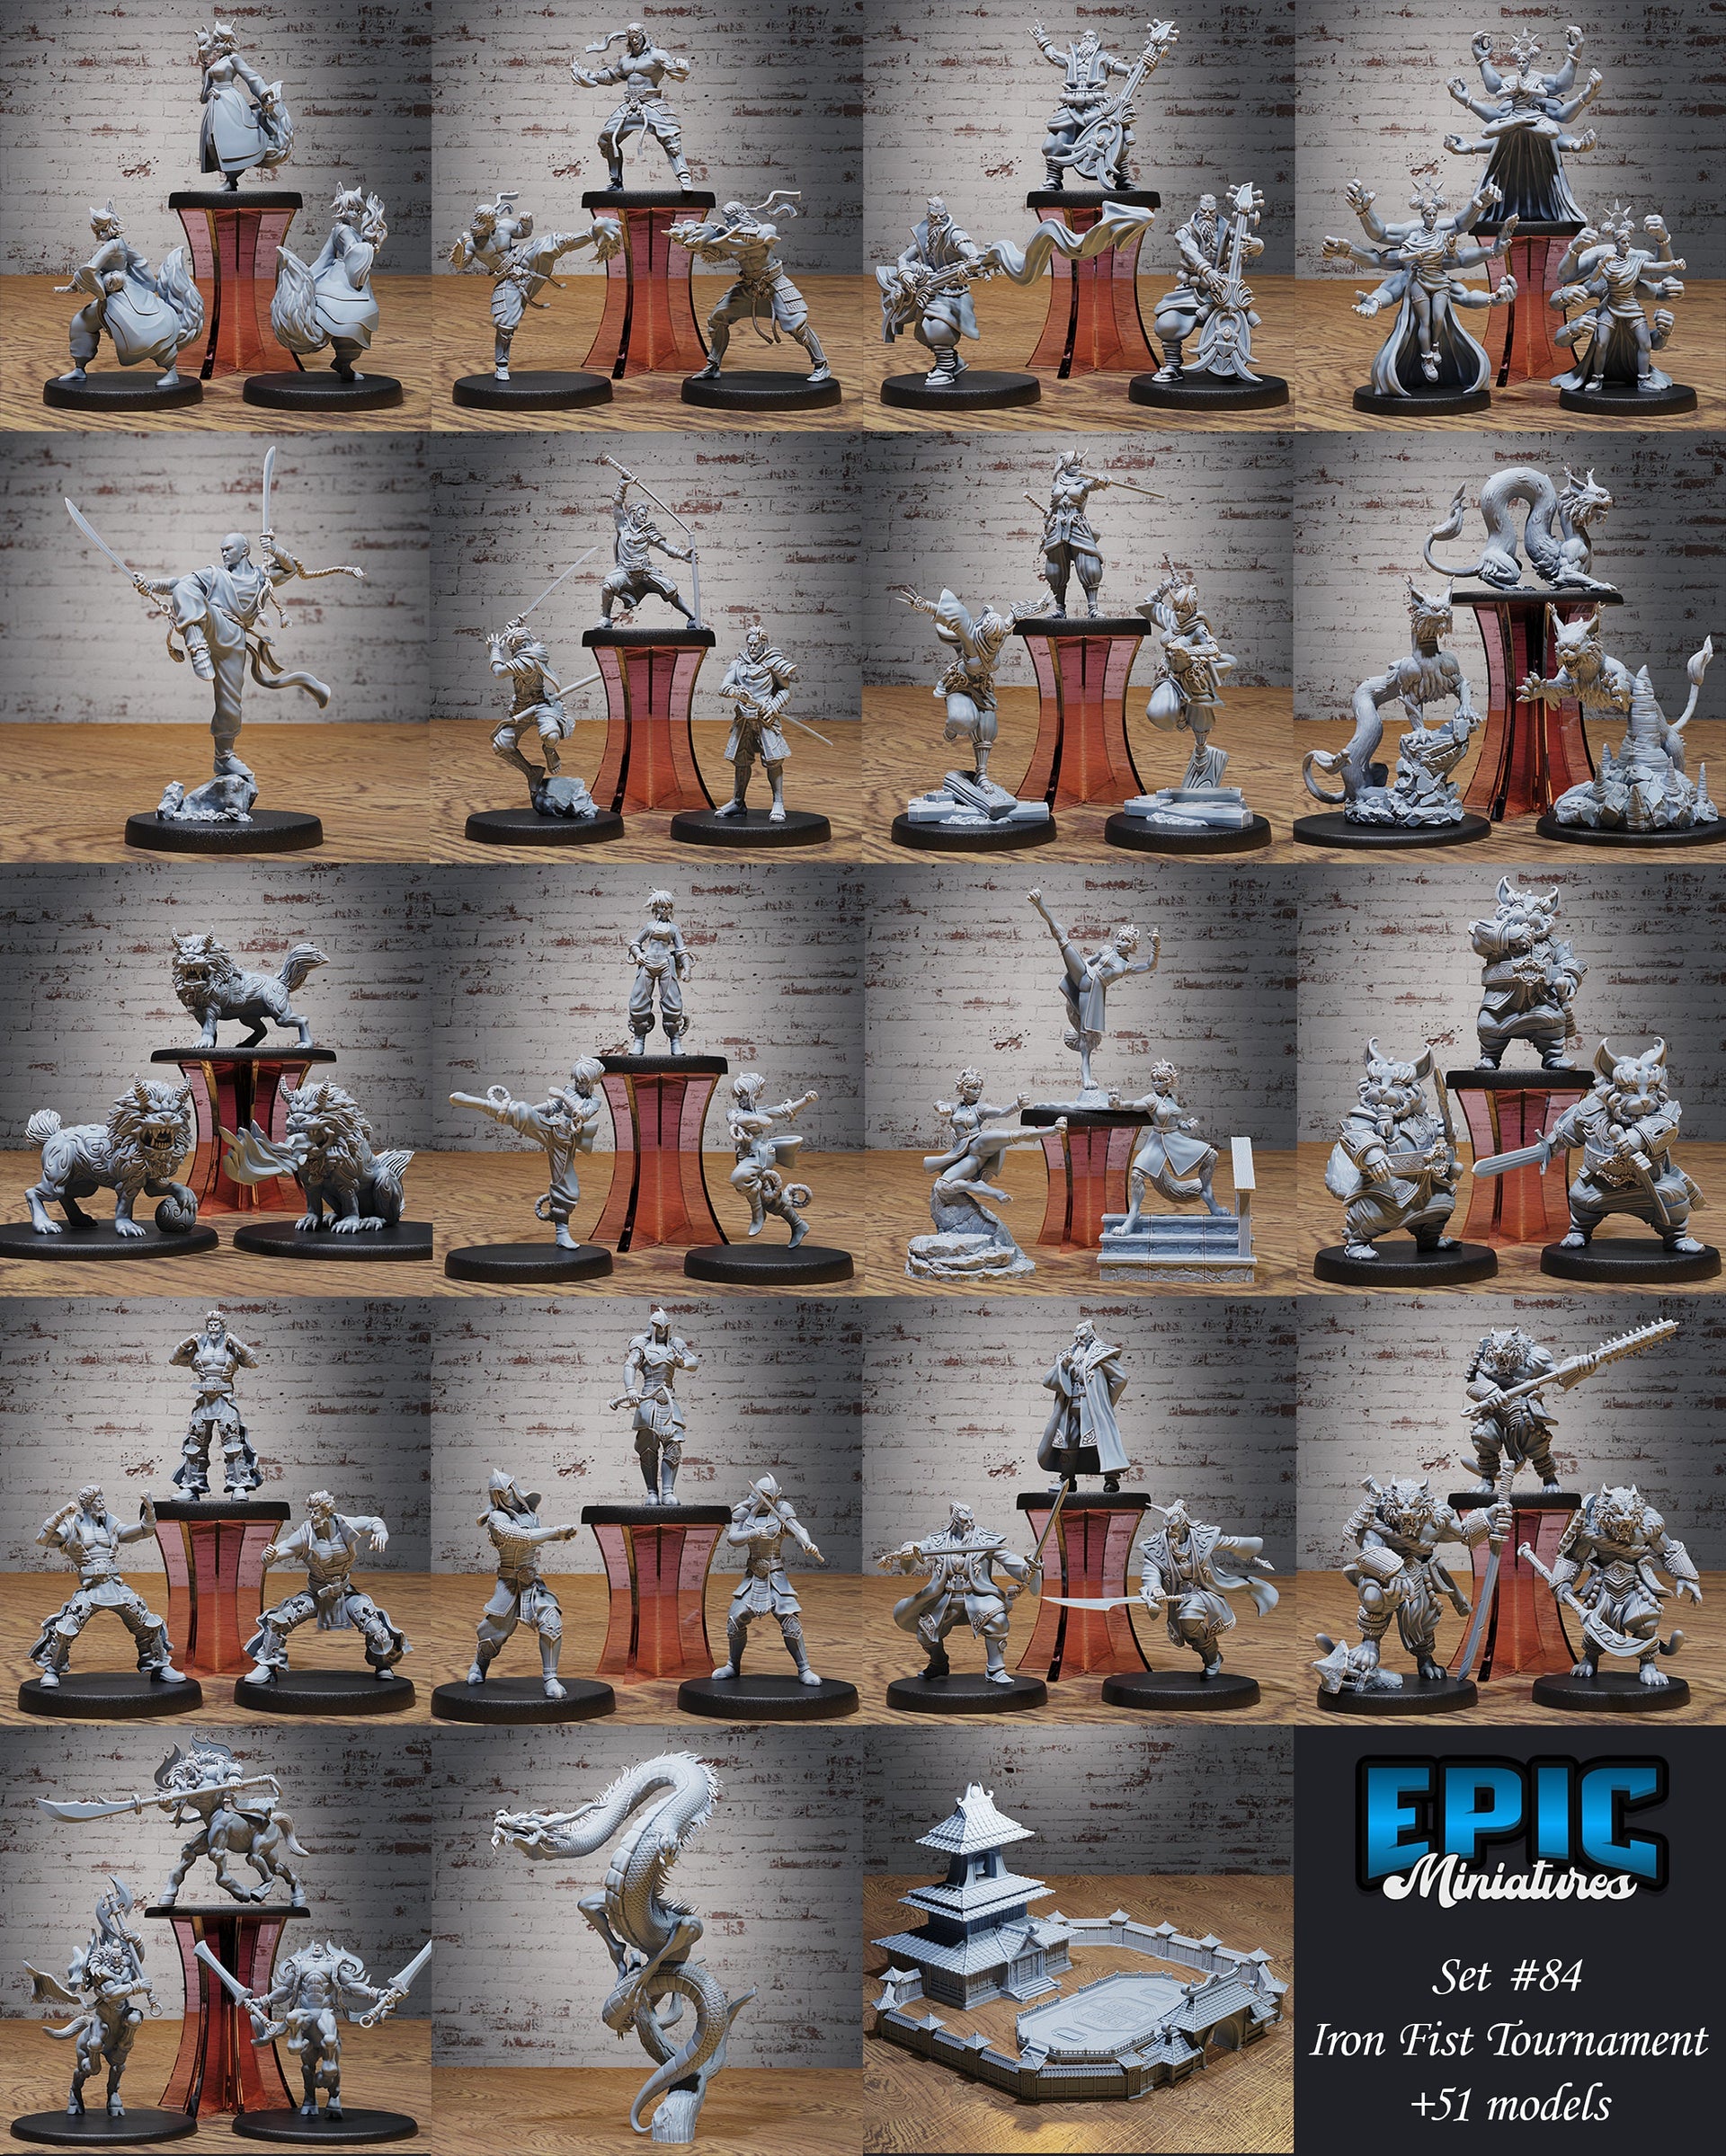 Eastern Cat Folk - Epic Miniatures | Ninth Age | 32mm |Iron Fist Tournament | Tabaxi | Tabby | Fighter | Warrior